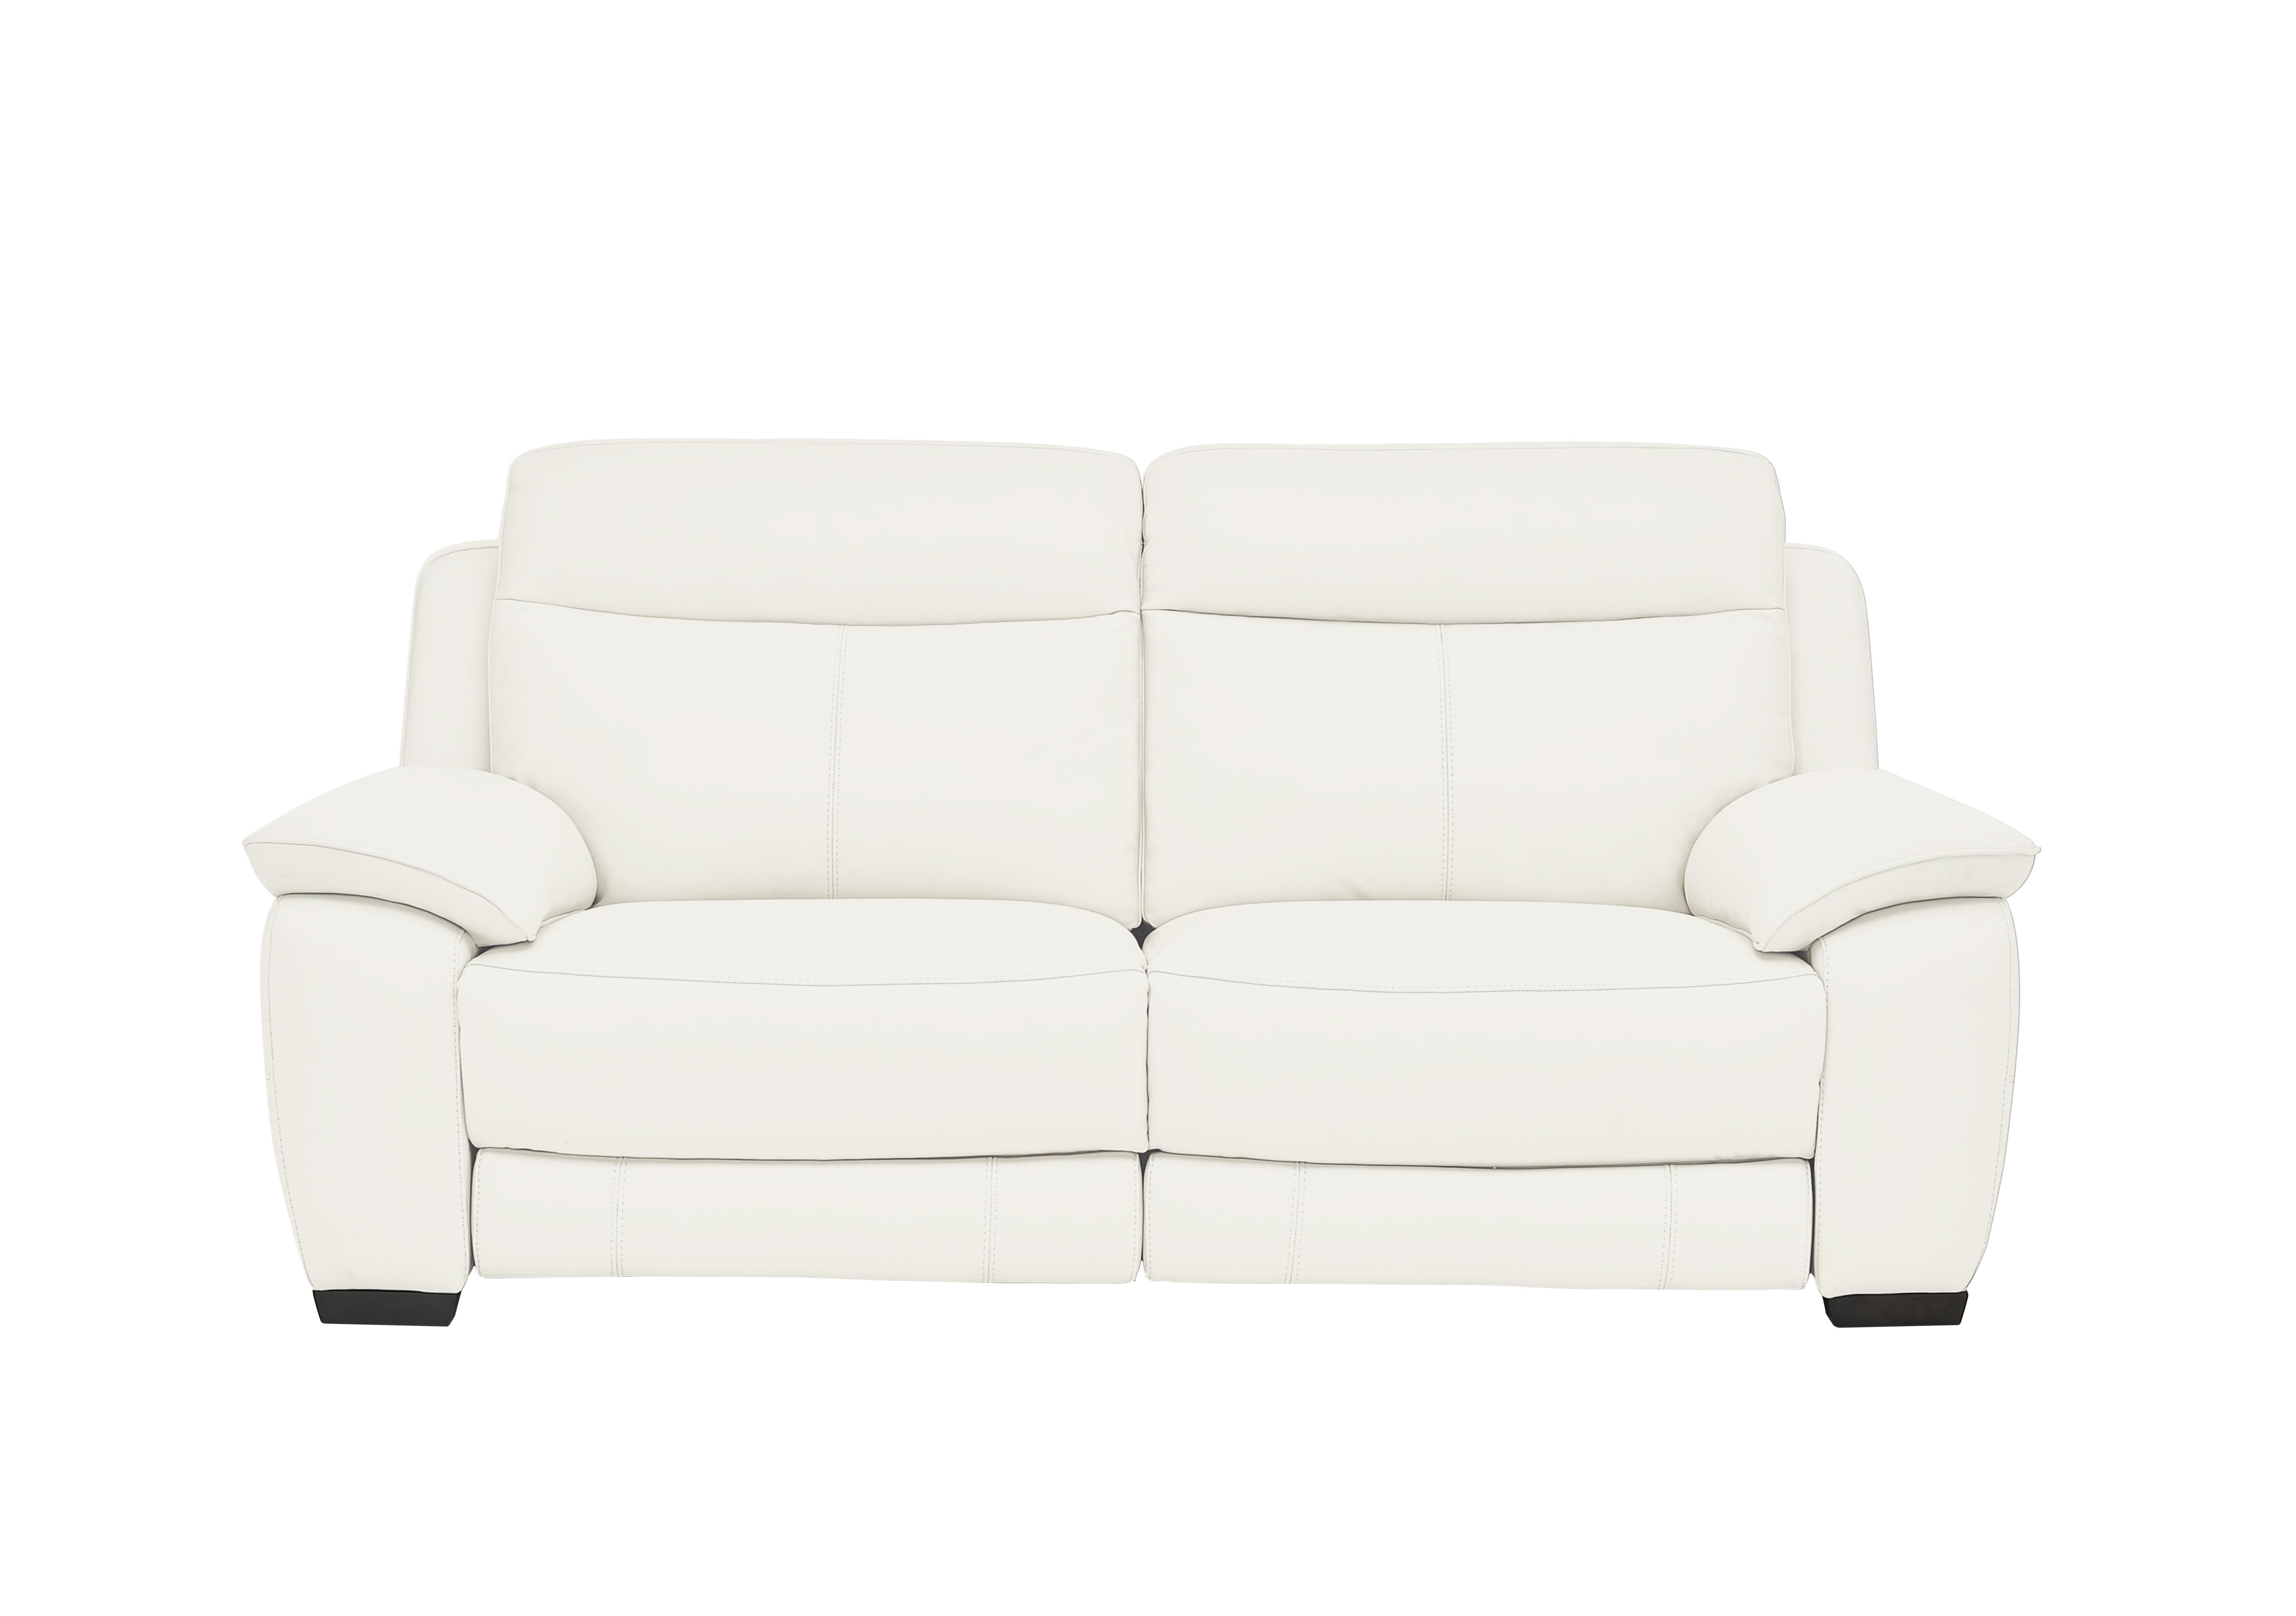 Starlight Express 3 Seater Leather Recliner Sofa with Power Headrests in Bv-744d Star White on Furniture Village